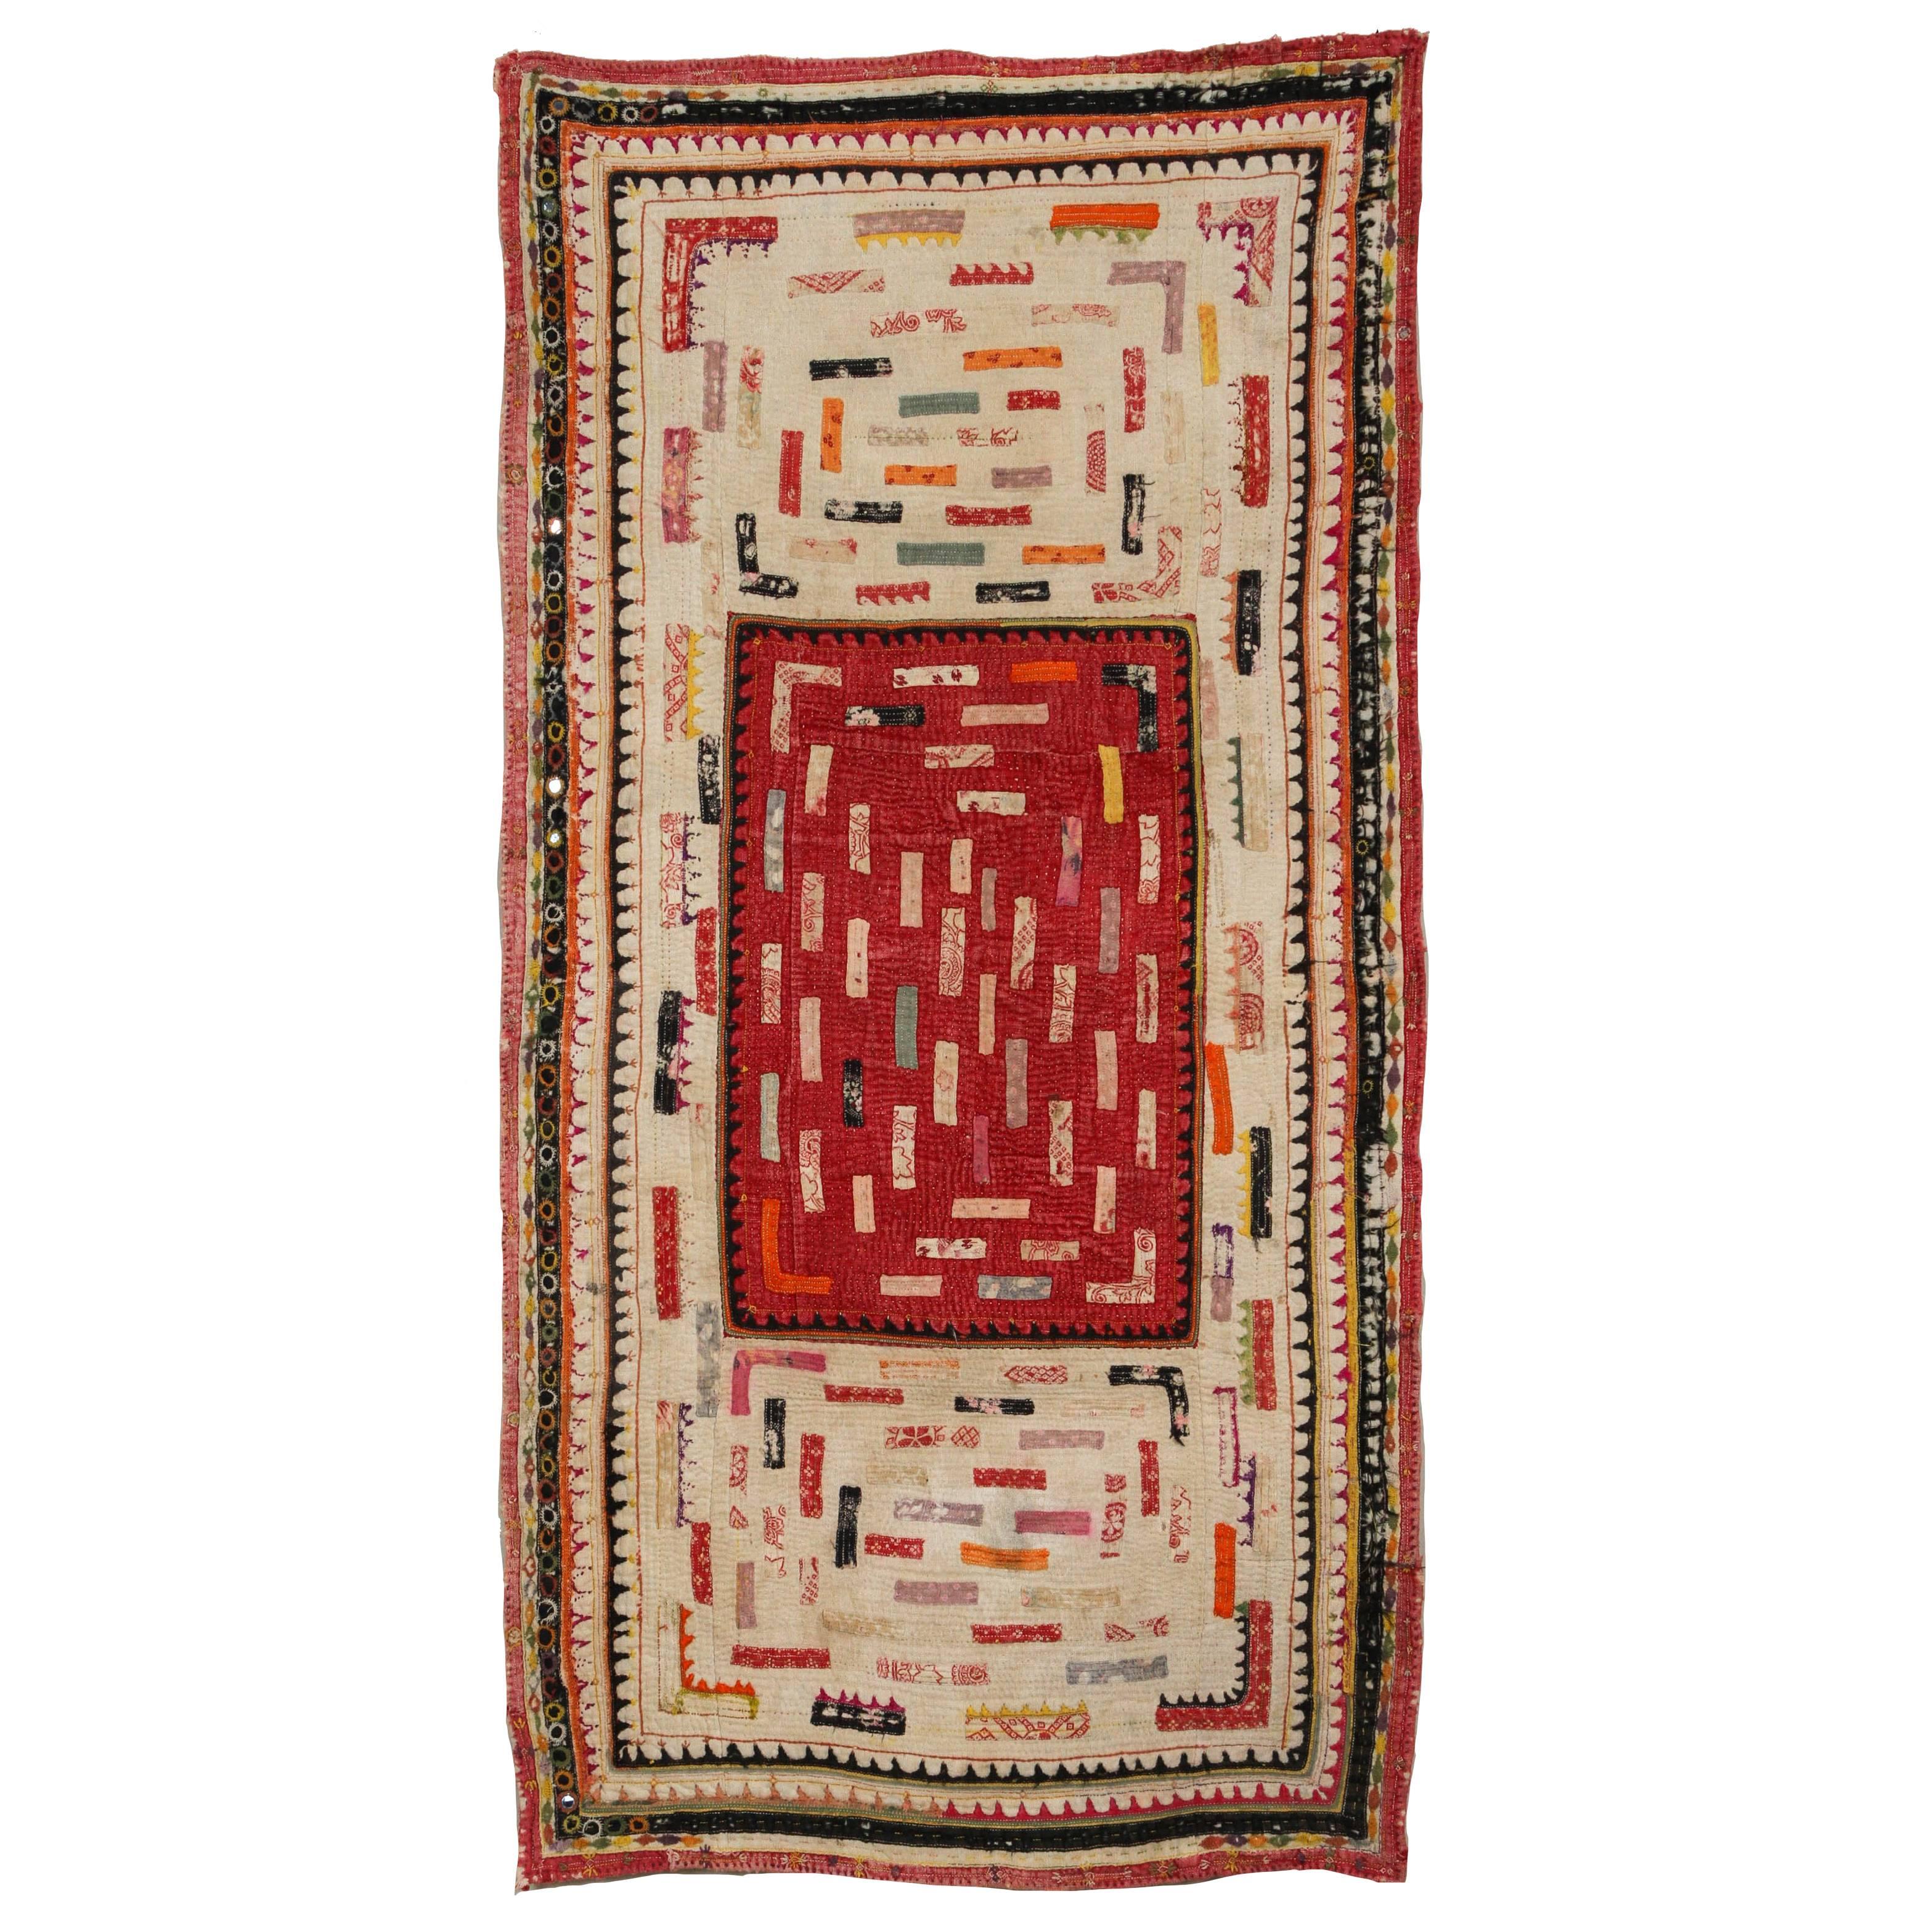 Tribal Indian Charon Wedding Quilt, Multicolor, Red Field and Applique For Sale